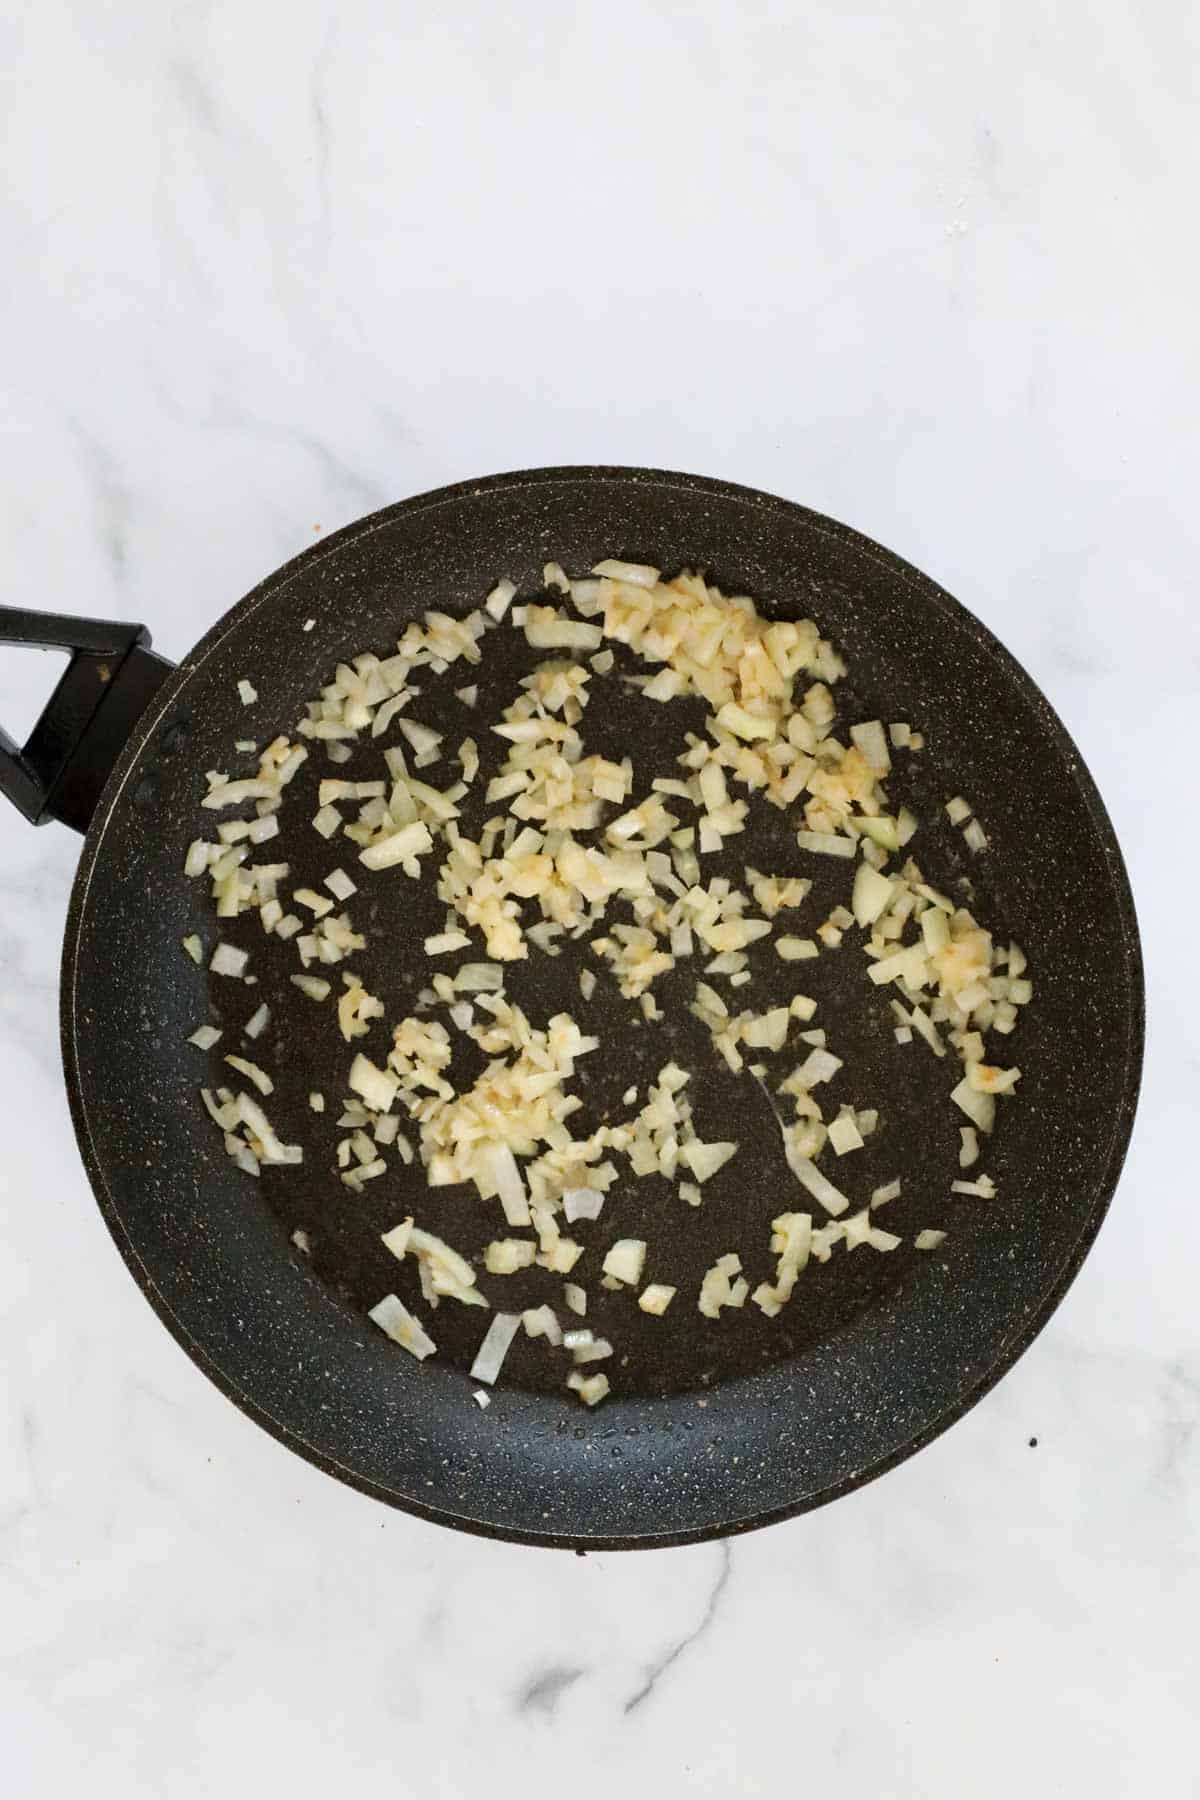 Garlic and diced onion sauteing in a frying pan.